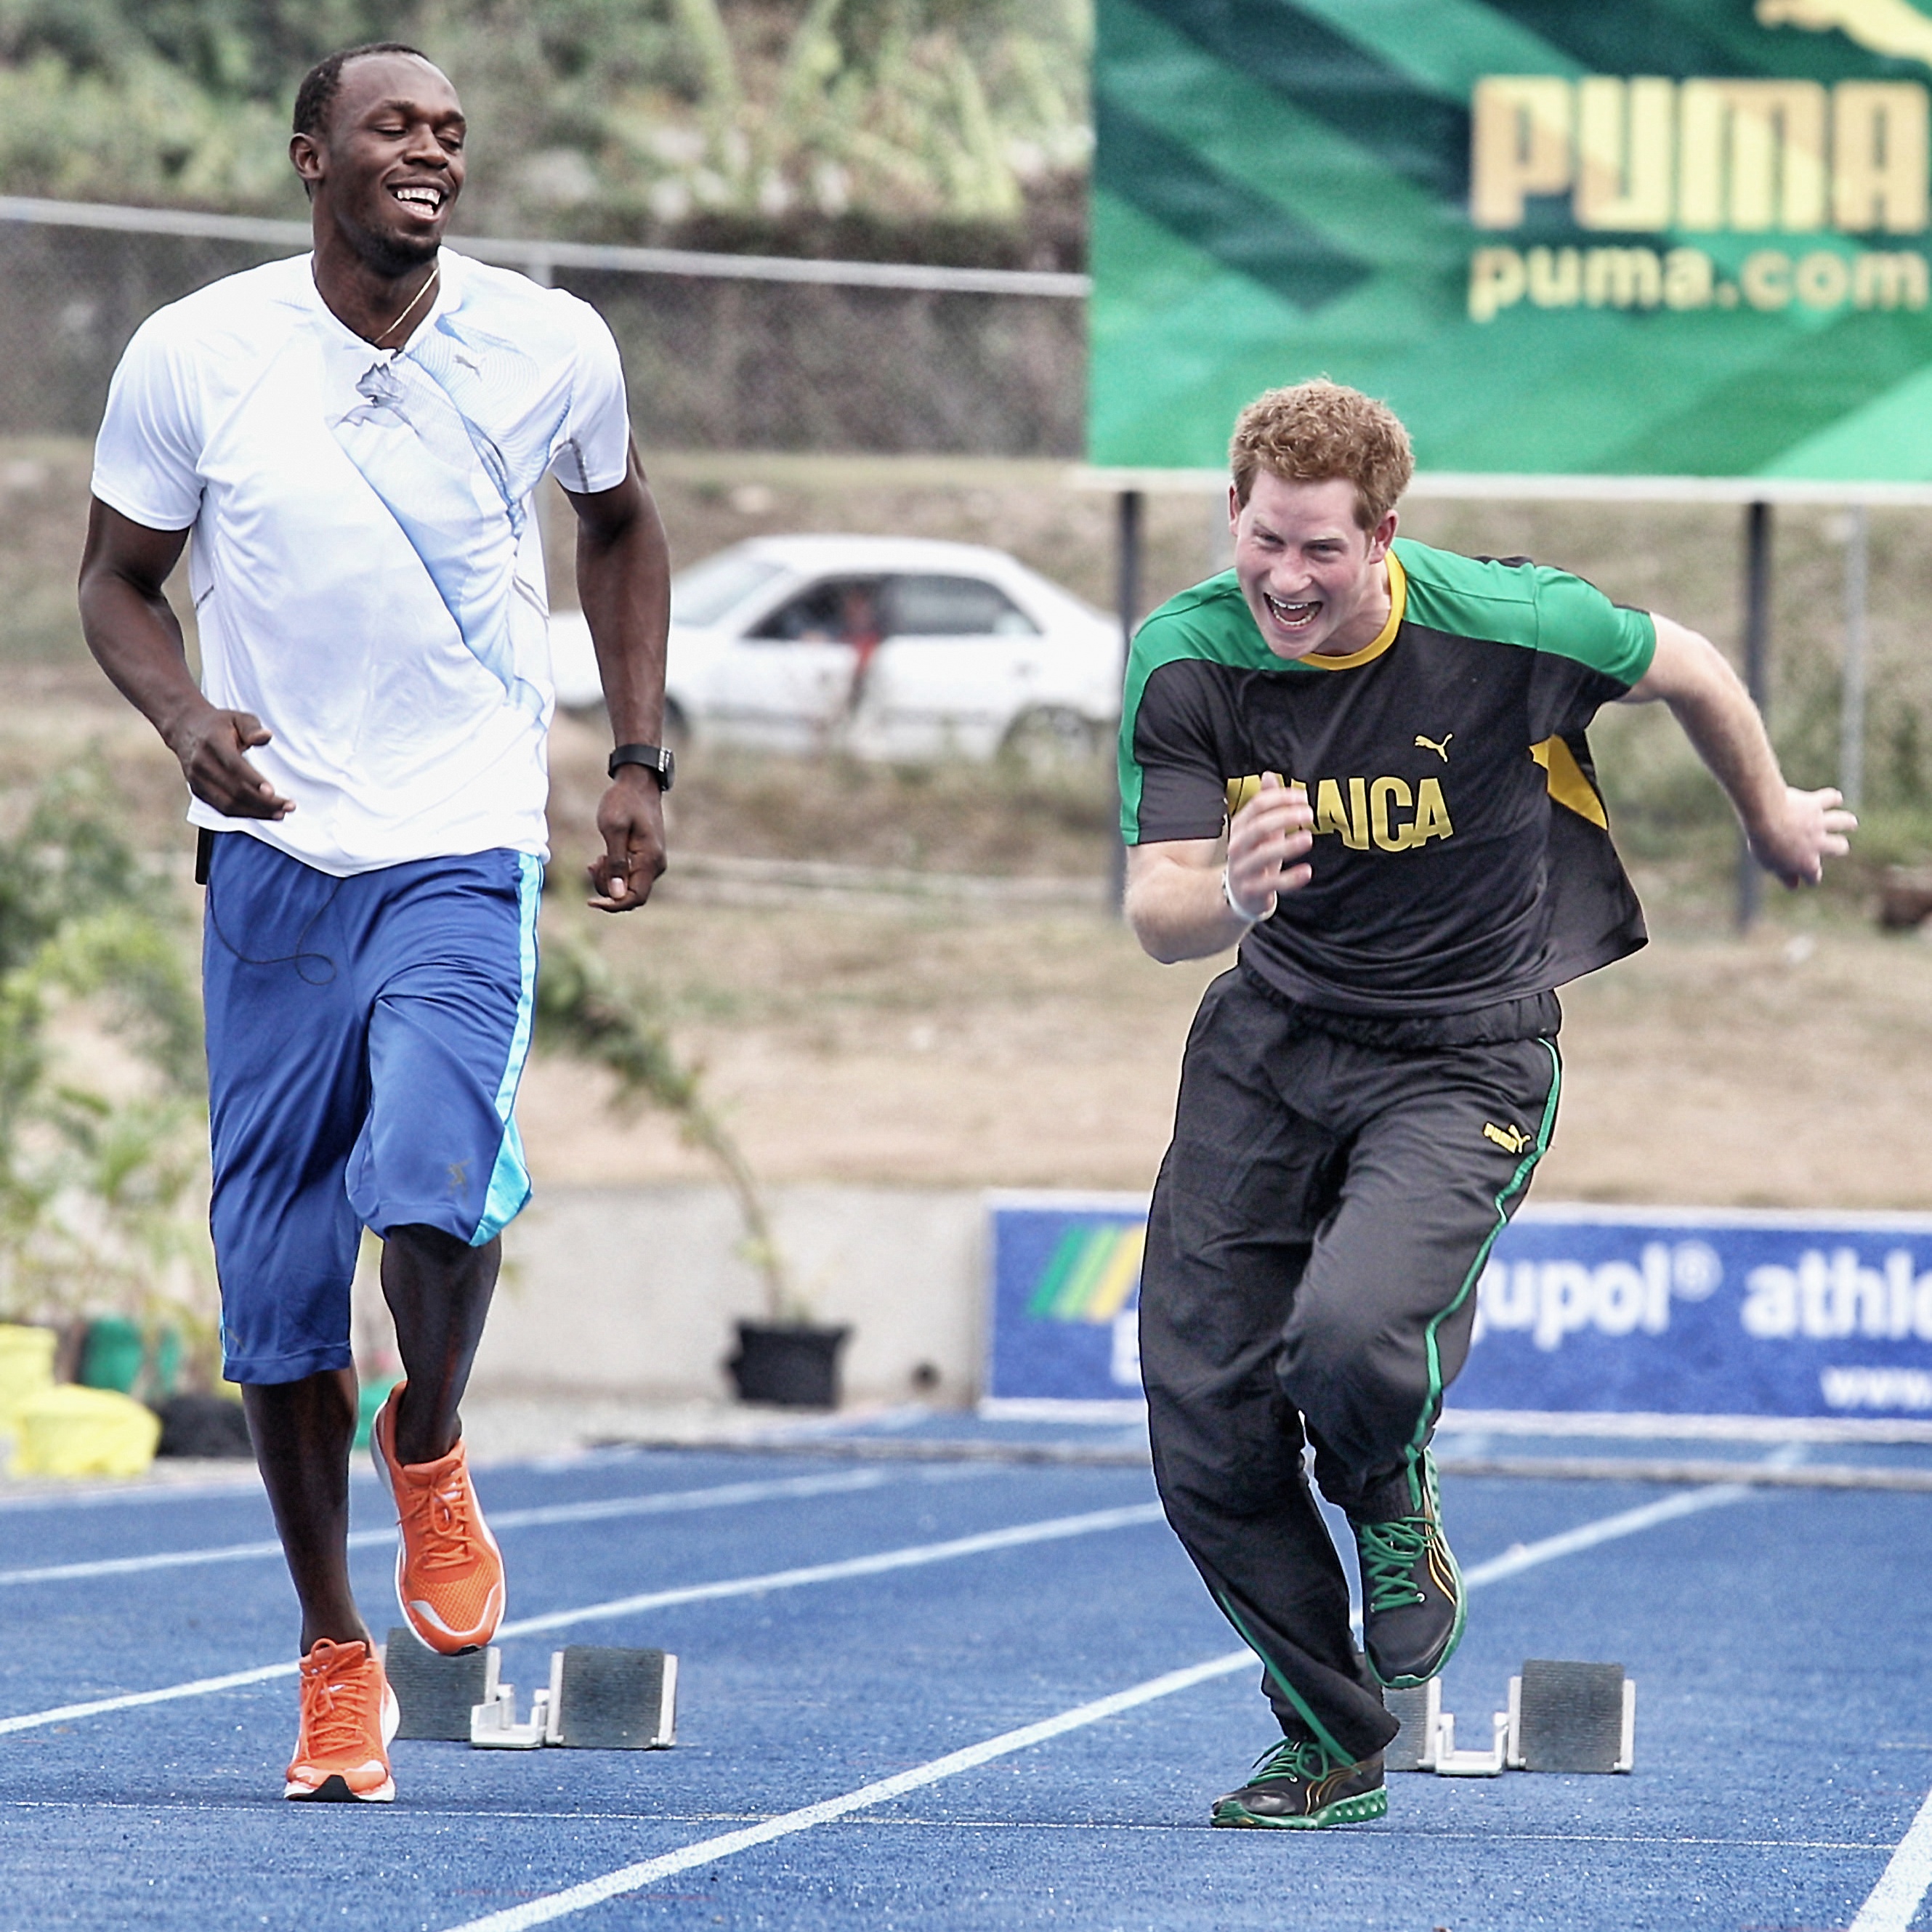 Usain Bolt and Prince Harry racing at the University of the West Indies in Kingston, Jamaica on March 6, 2012 | Source: Getty Images